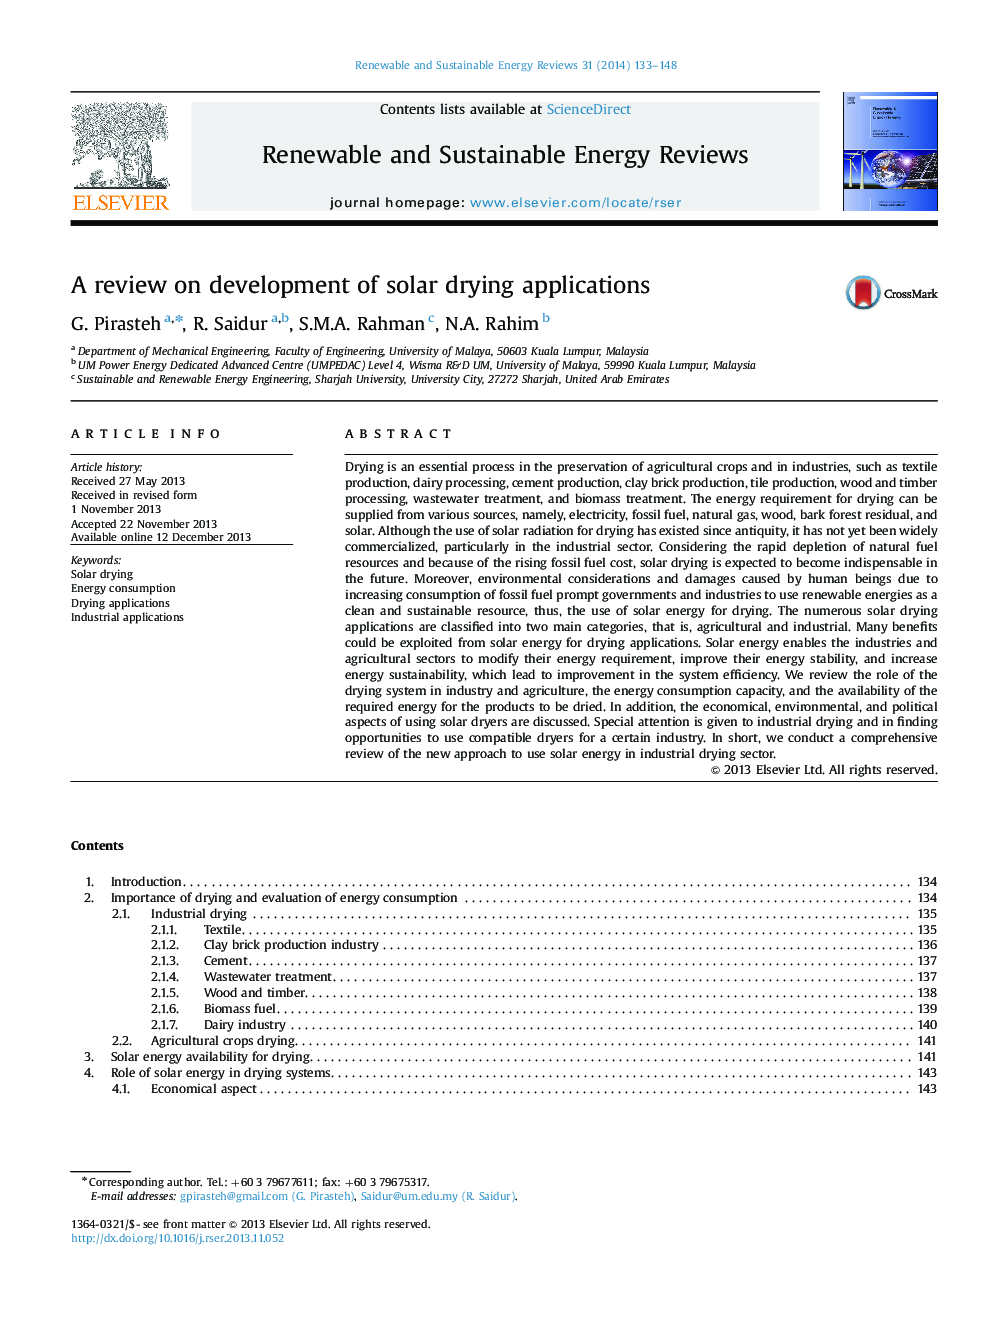 A review on development of solar drying applications